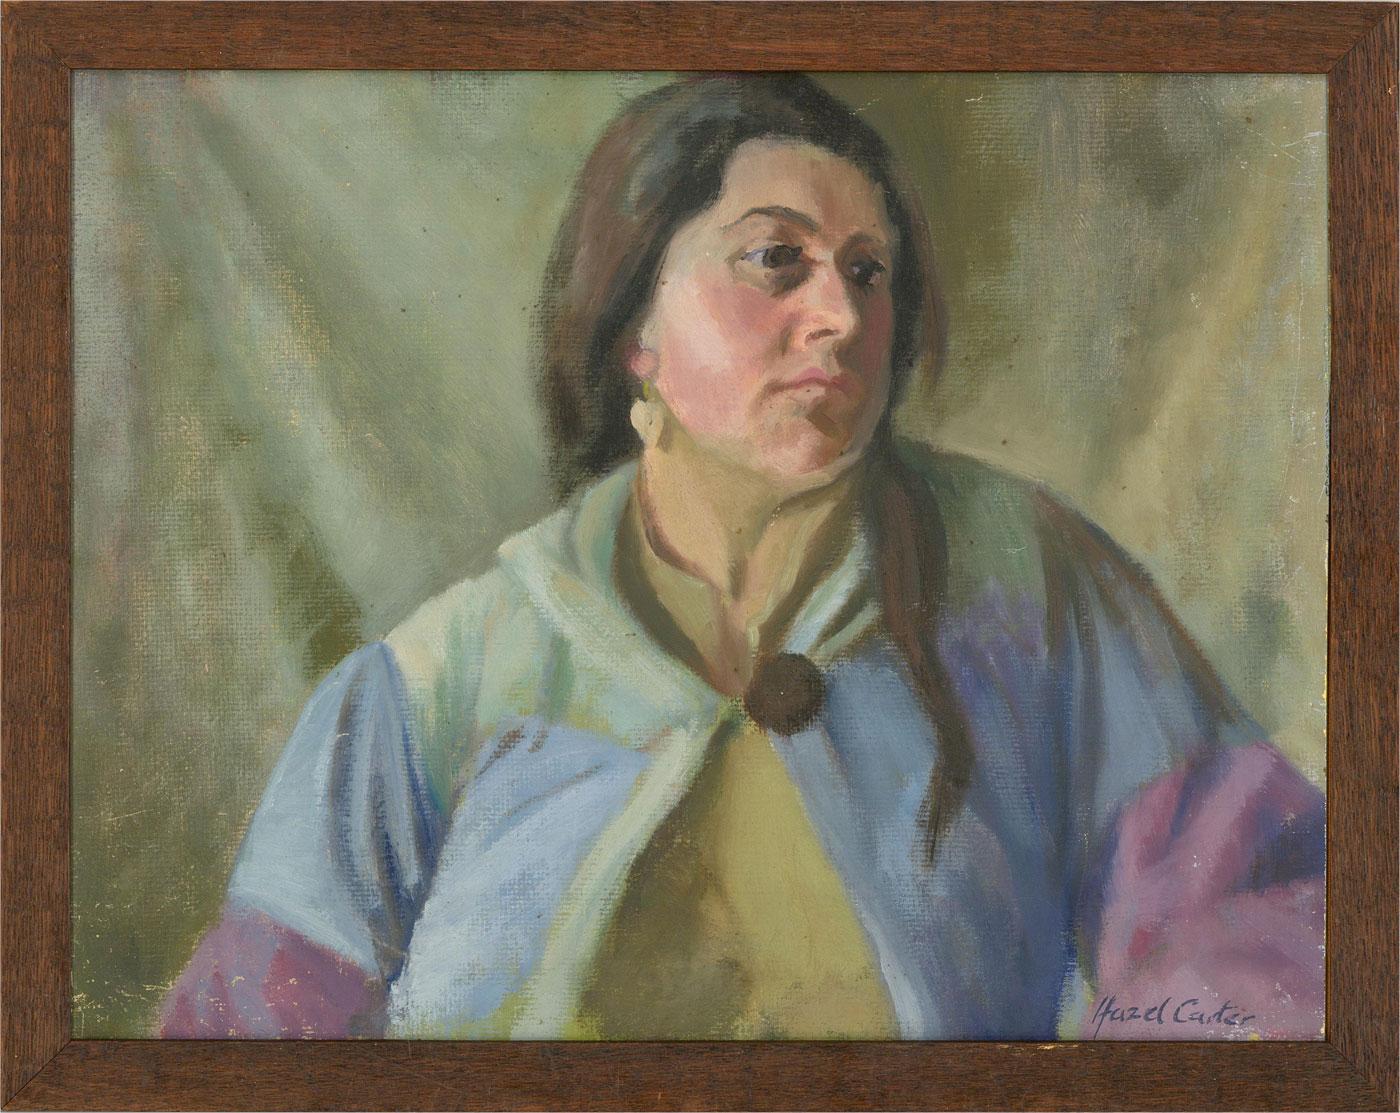 A wonderful moment captured in oil, this portrait shows a moment of deep for a rosy cheeked woman. Her dark hair falls over one shoulder of her colourful jacket as she tilts her head to the right. The artist has signed to the lower right. The